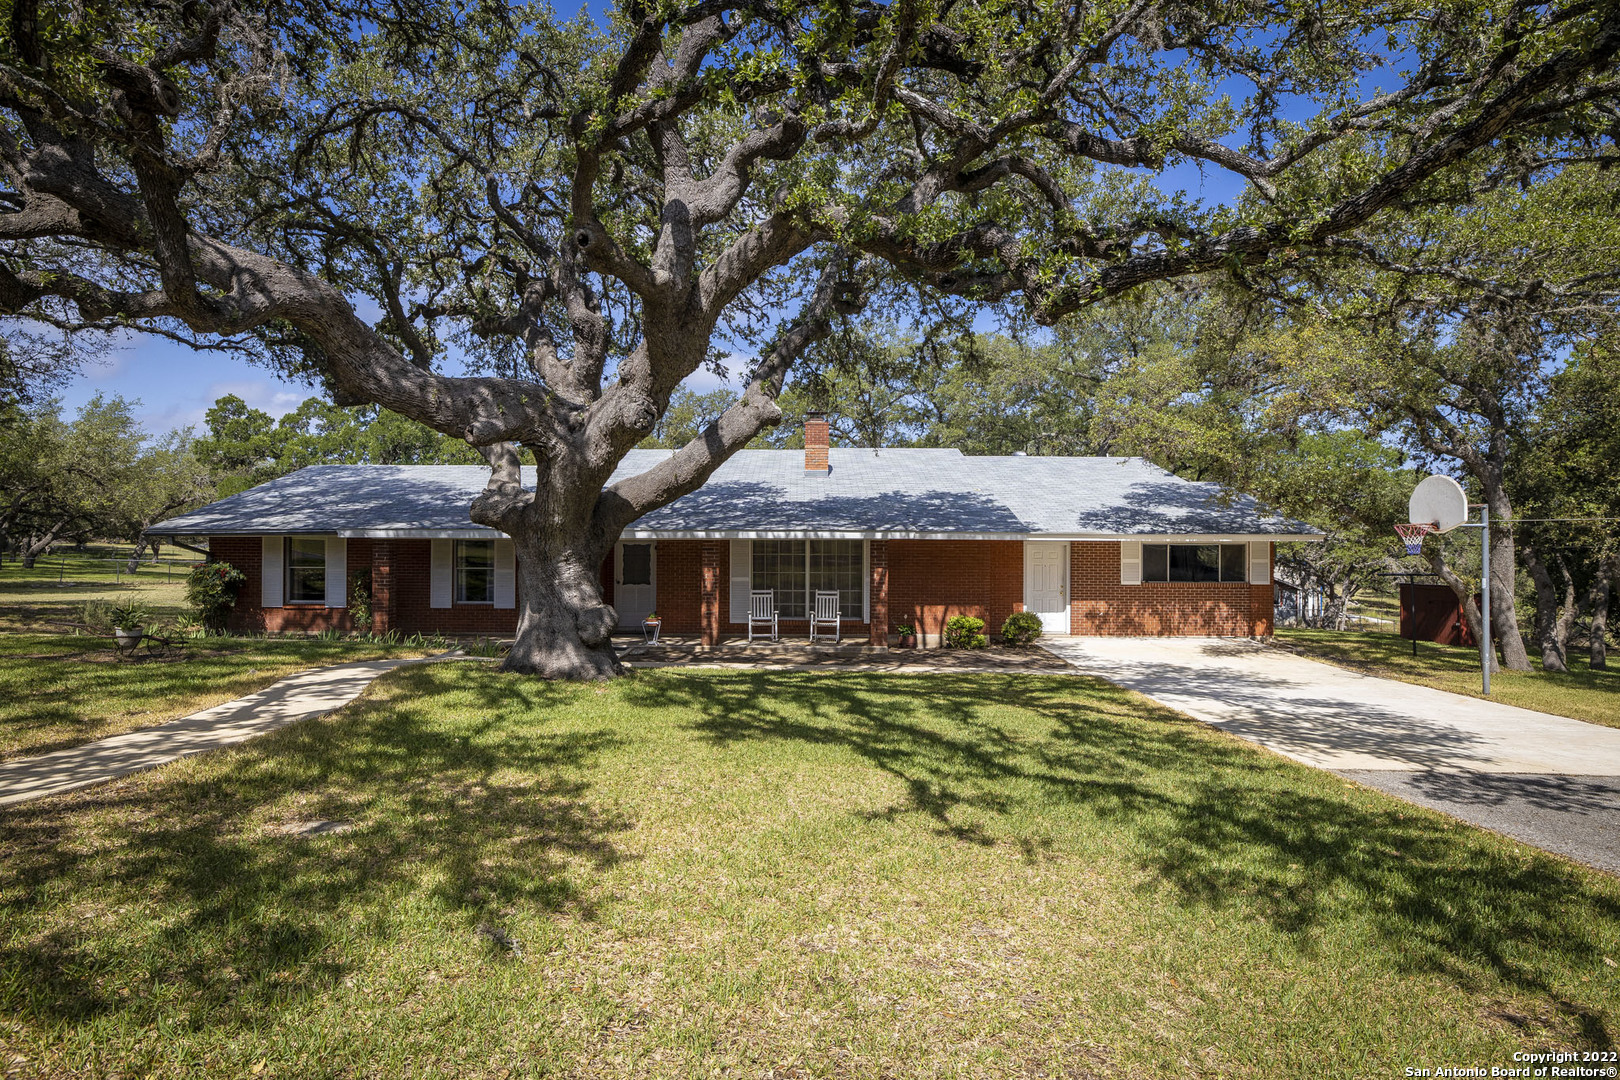 ***OPEN HOUSE 8/7 2-4PM*** As you pull up to this Hill Country Home, you are greeted with a massive Oak tree that is soaring into the sky with lovely climbing limbs and rich history! On almost 3 acres, this home allows for endless opportunities; 4H/FFA projects, stalls, tack area, 3+ car carport, circle drive, mature & wooded trees with woods to explore & so much more! You are RIGHT in the middle of it all, located right next to Timberwood Park, off Borgfeld Rd, close to the BRAND NEW PIEPER HS, grocery stores, shopping, etc & no HOA! Bring your boats, RVs, trailers, & have a ball! As you enter the exceptionally maintained home, you are greeted with over 3,000 sq feet of entertaining space. Two living areas, 2 dining areas, dual masters & a fireplace that is magazine worthy! The kitchen features a window out to view your property with custom cabinets, island kitchen and an open floorplan that allows for a functional flow & great space for your family! The back porch is covered and elevated for a fantastic breeze for all of your Texas sunsets. Step off the porch to lovely trees, mature landscaping & opportunities to make this space your own! This is a Texas dream come true!!